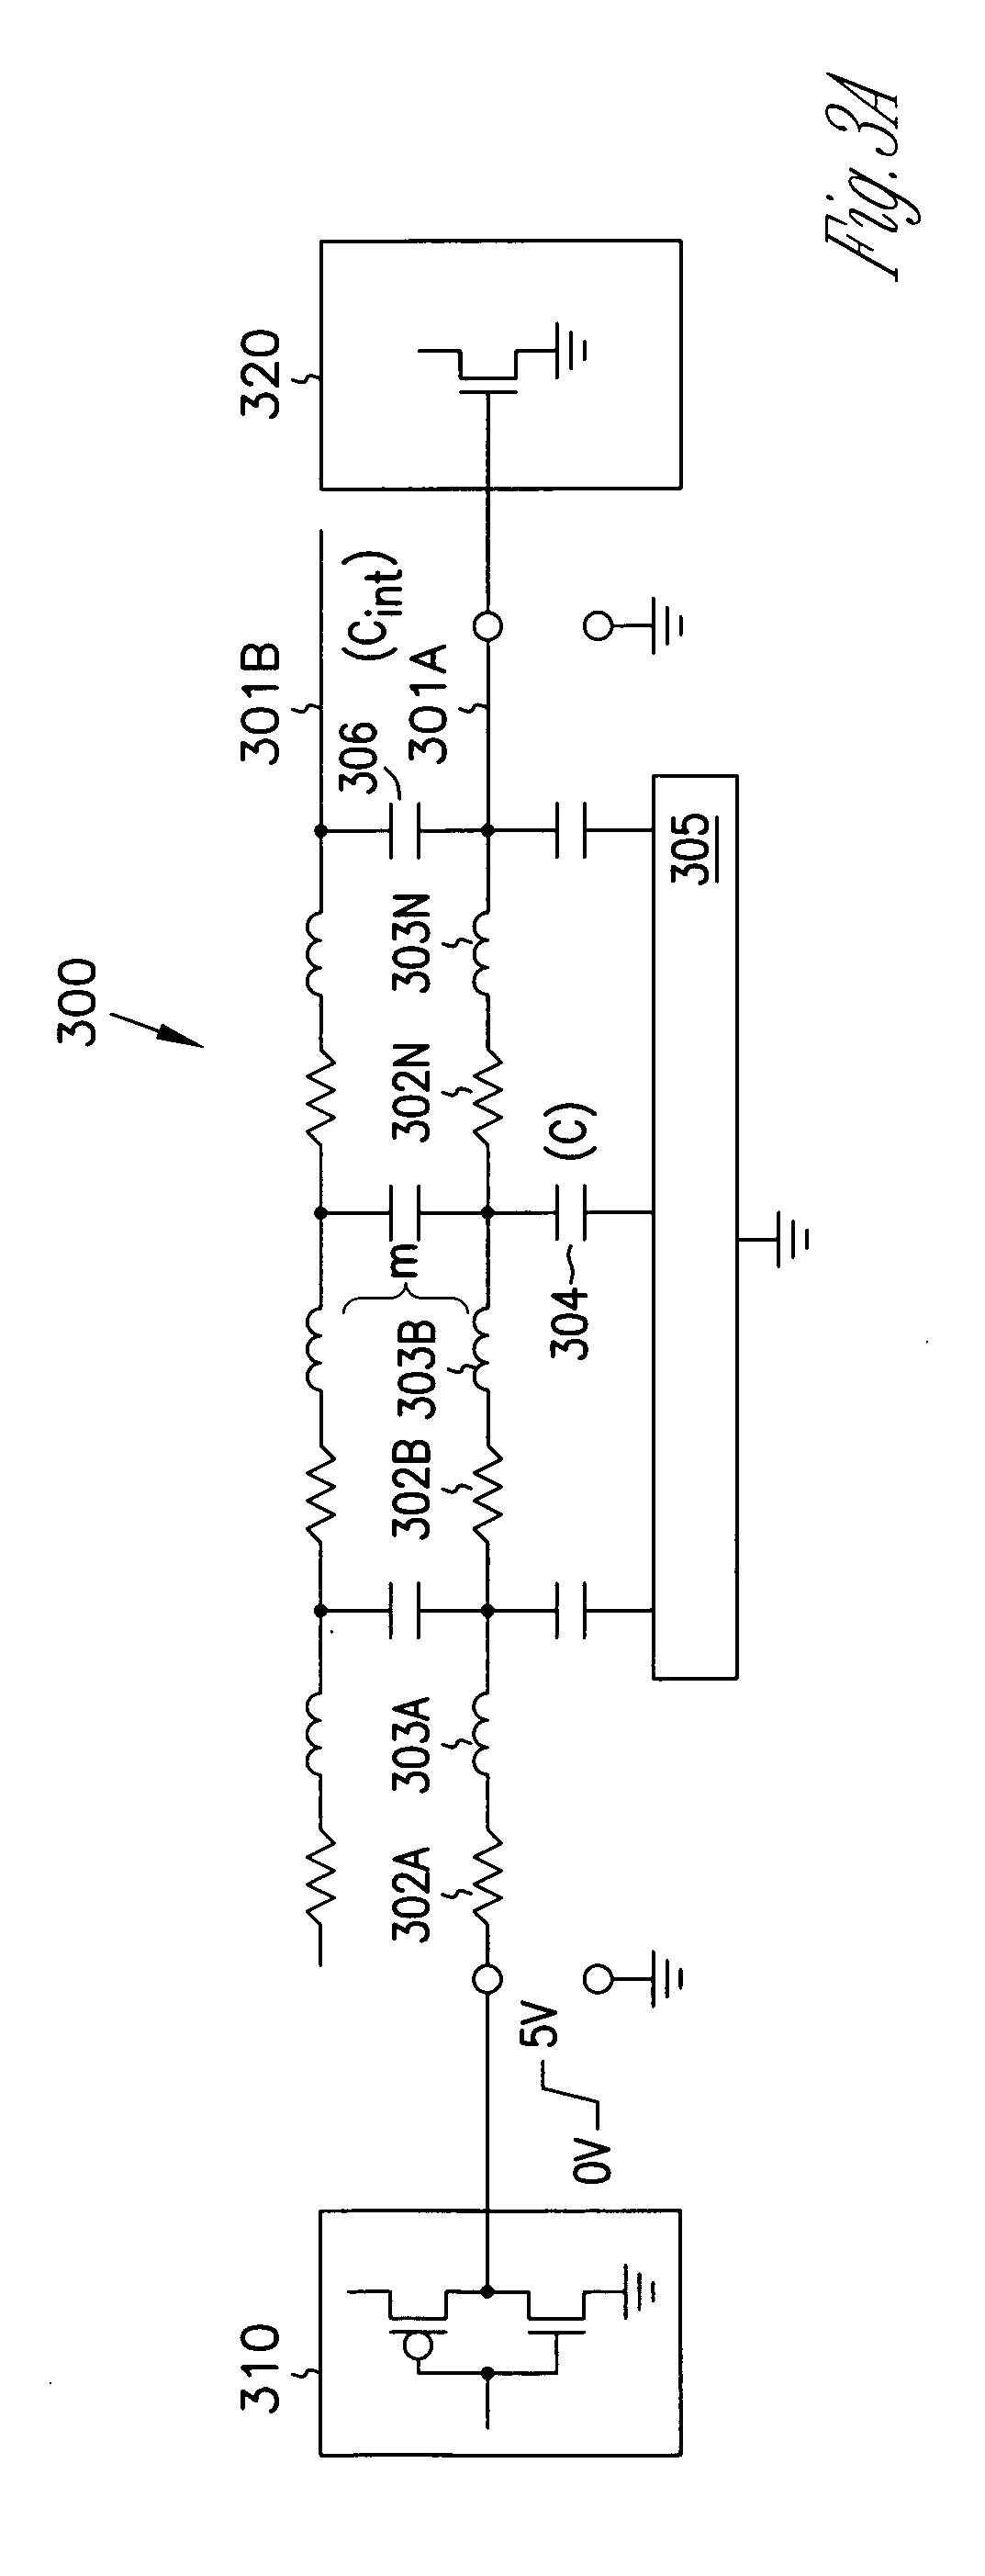 Capacitive techniques to reduce noise in high speed interconnections